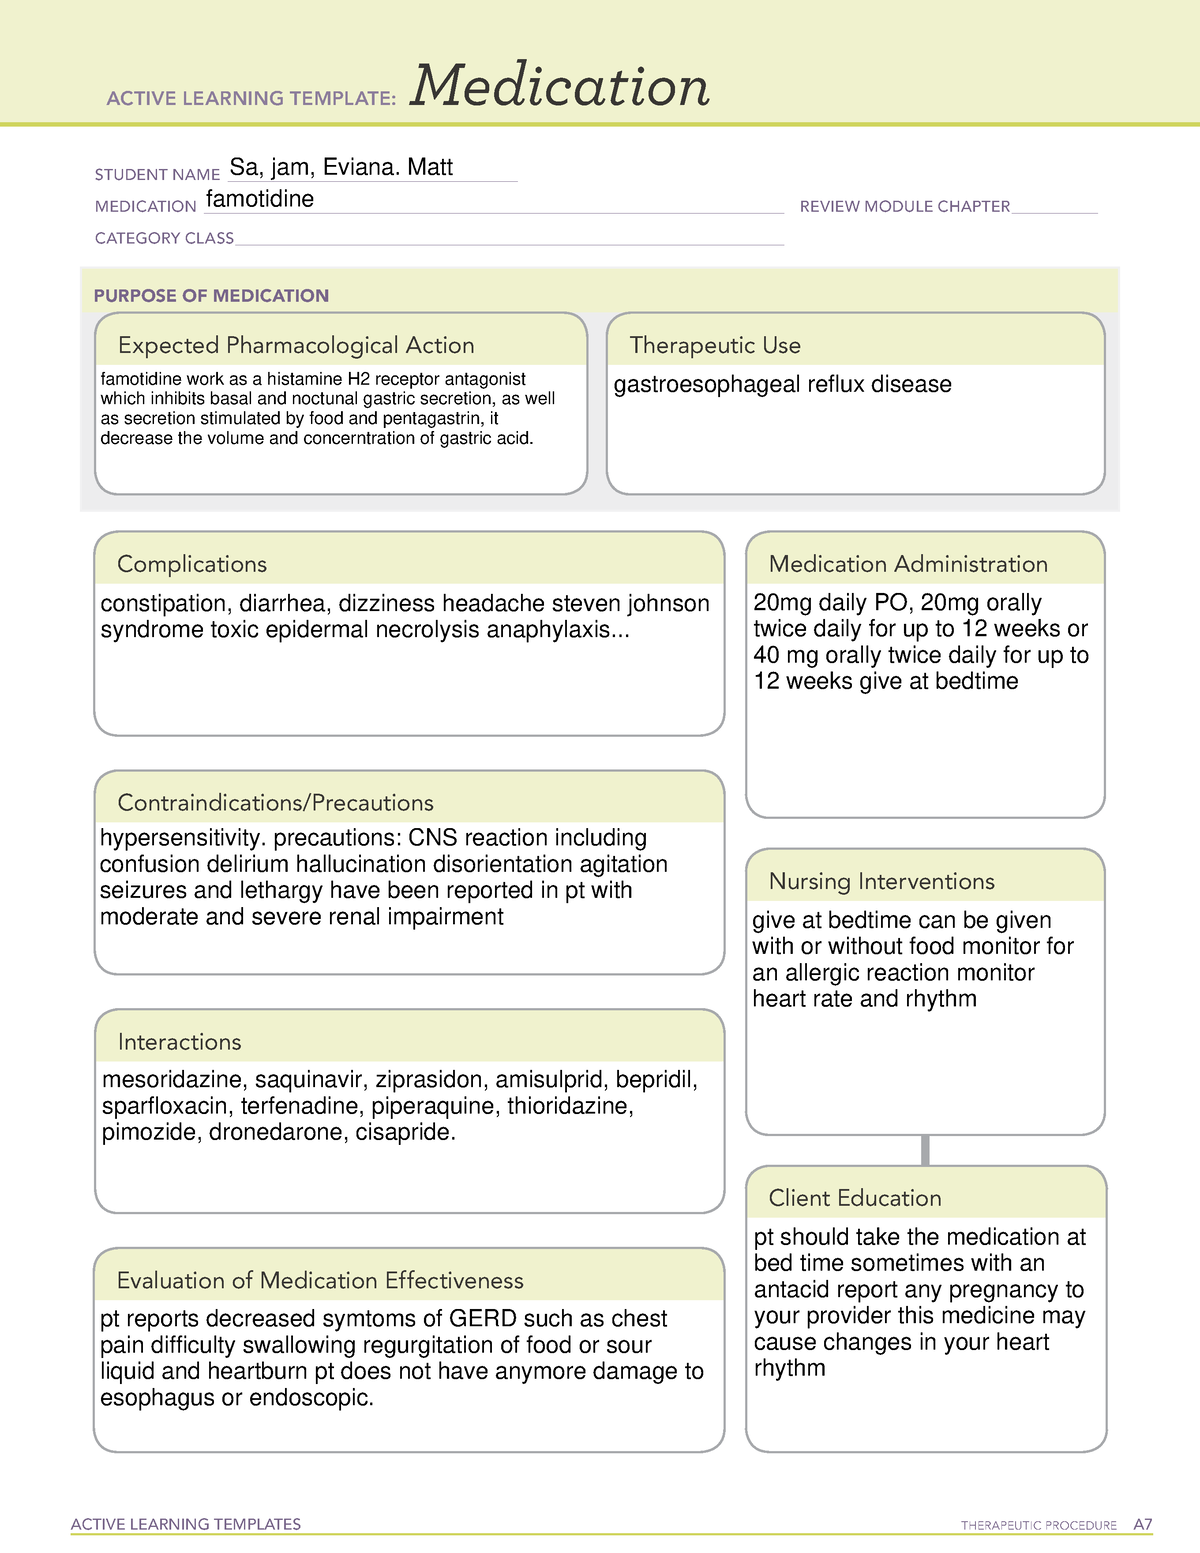 Famotidine revise ACTIVE LEARNING TEMPLATES THERAPEUTIC PROCEDURE A